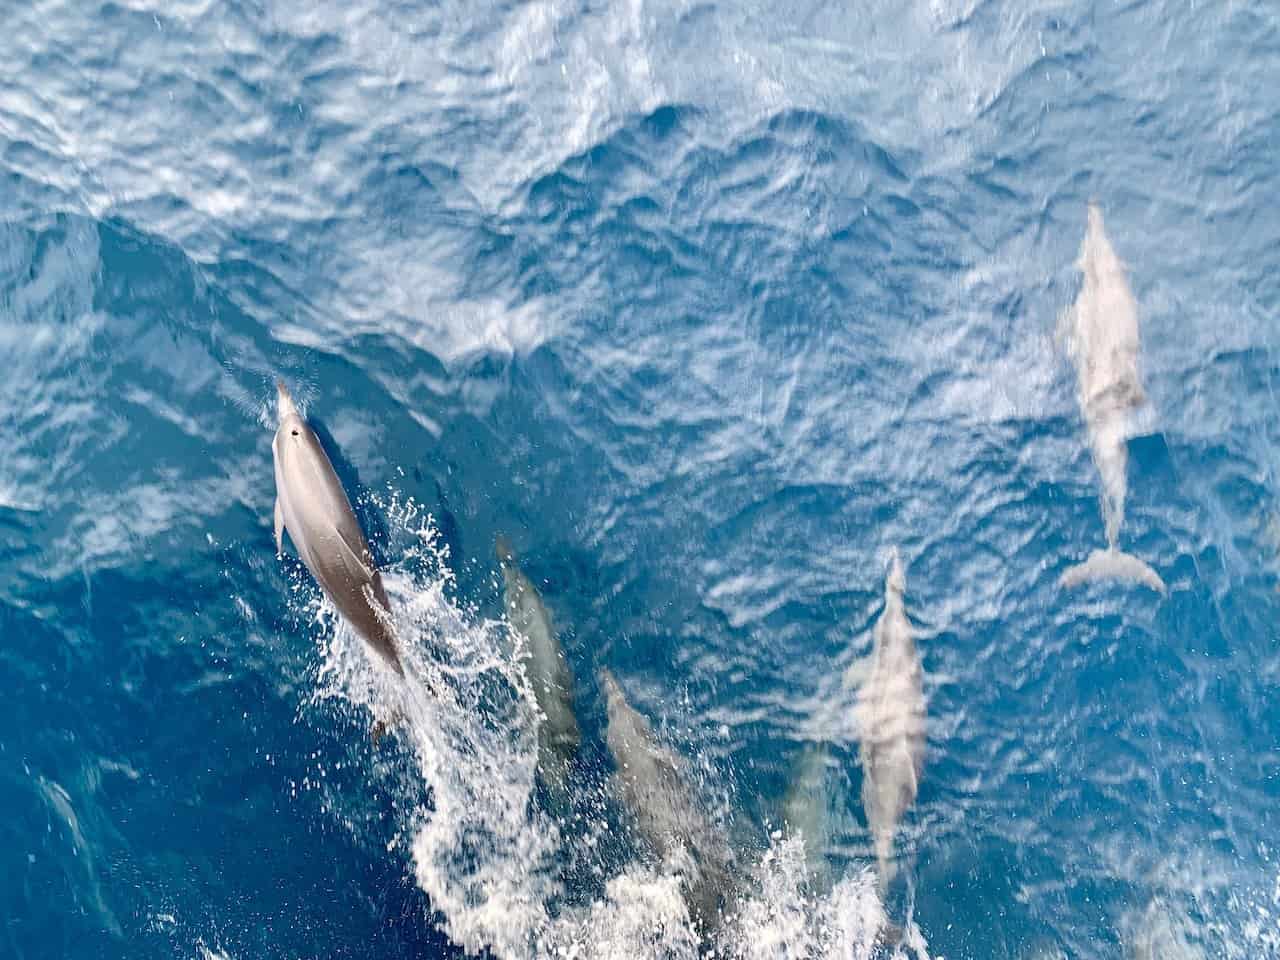 Great Barrier Reef Dolphins